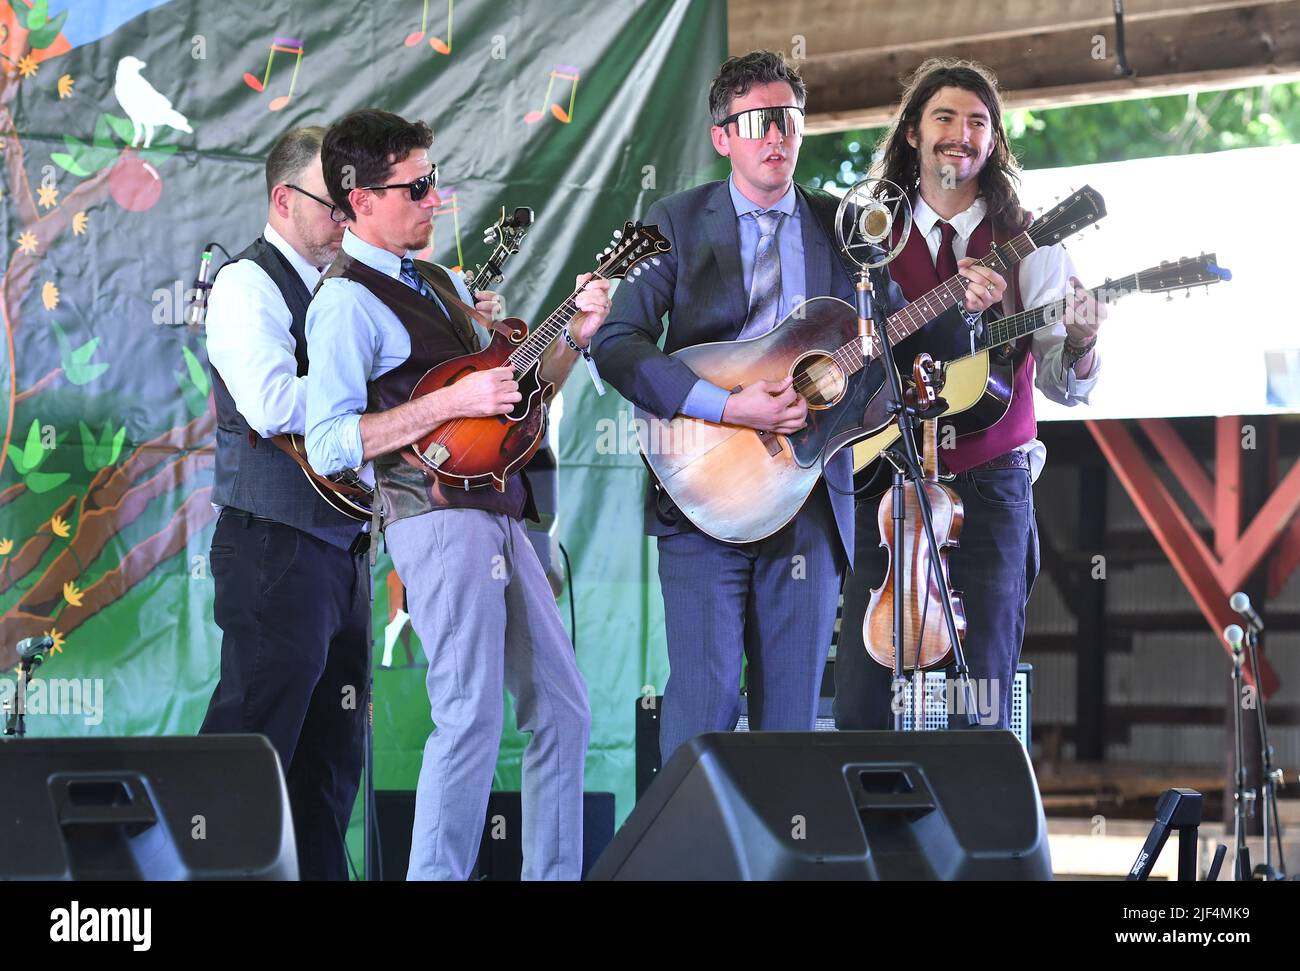 Band members of Poor Monroe, John Benjamin (mandolin), Eric Lee (guitar/fiddle), Sean Davis (guitar) are shown performing on stage during a “live” concert appearance at the Green River Festival. Stock Photo